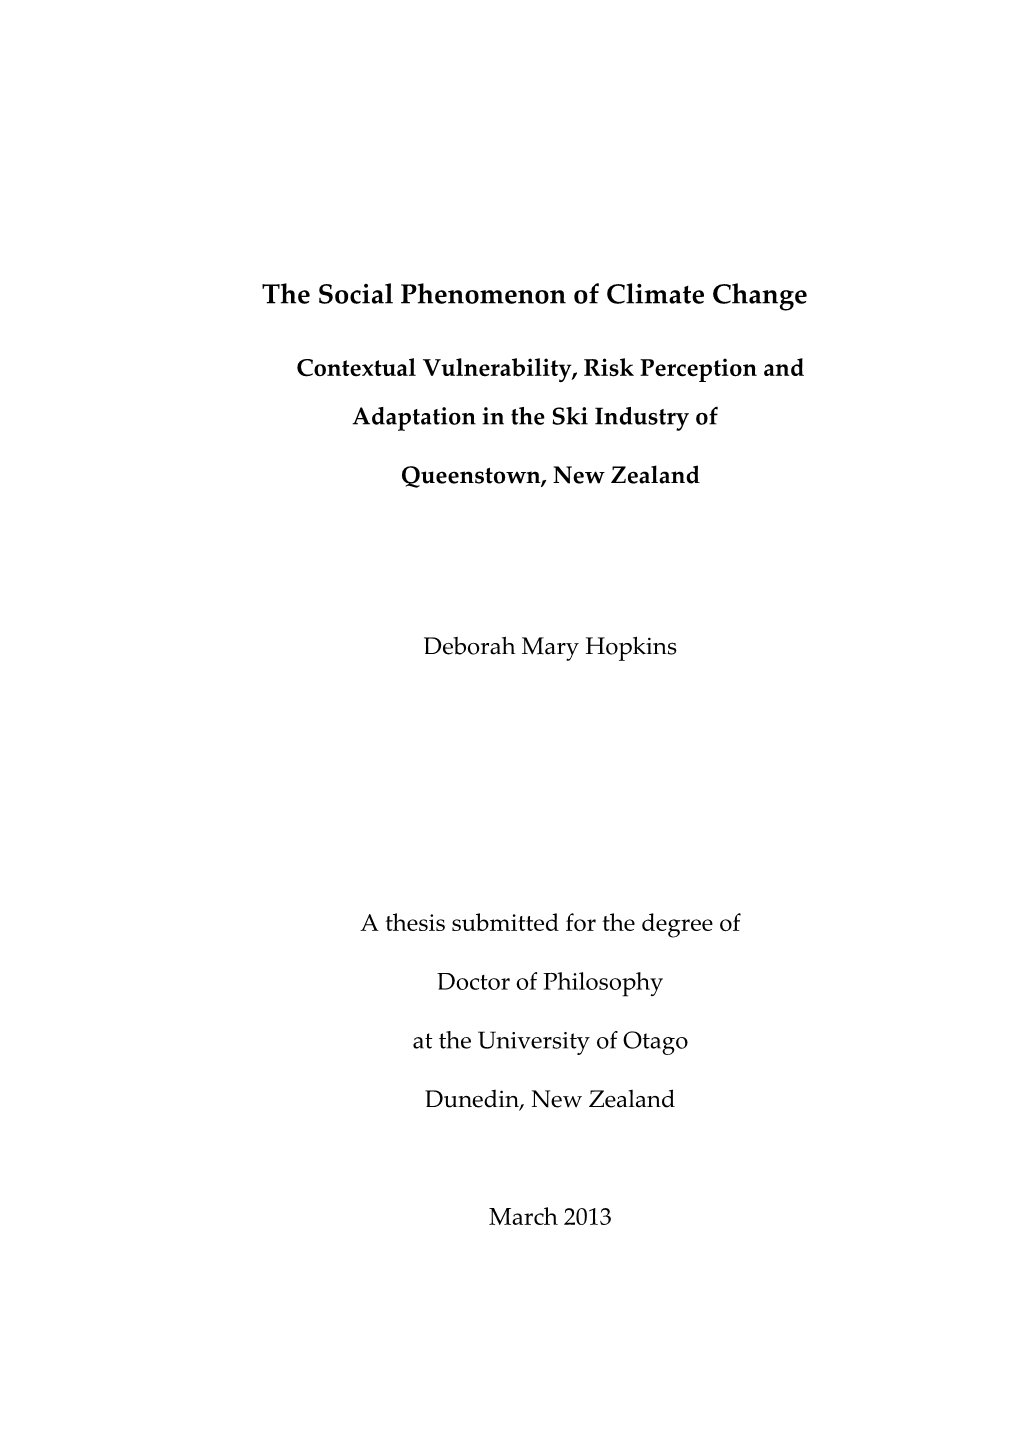 The Social Phenomenon of Climate Change